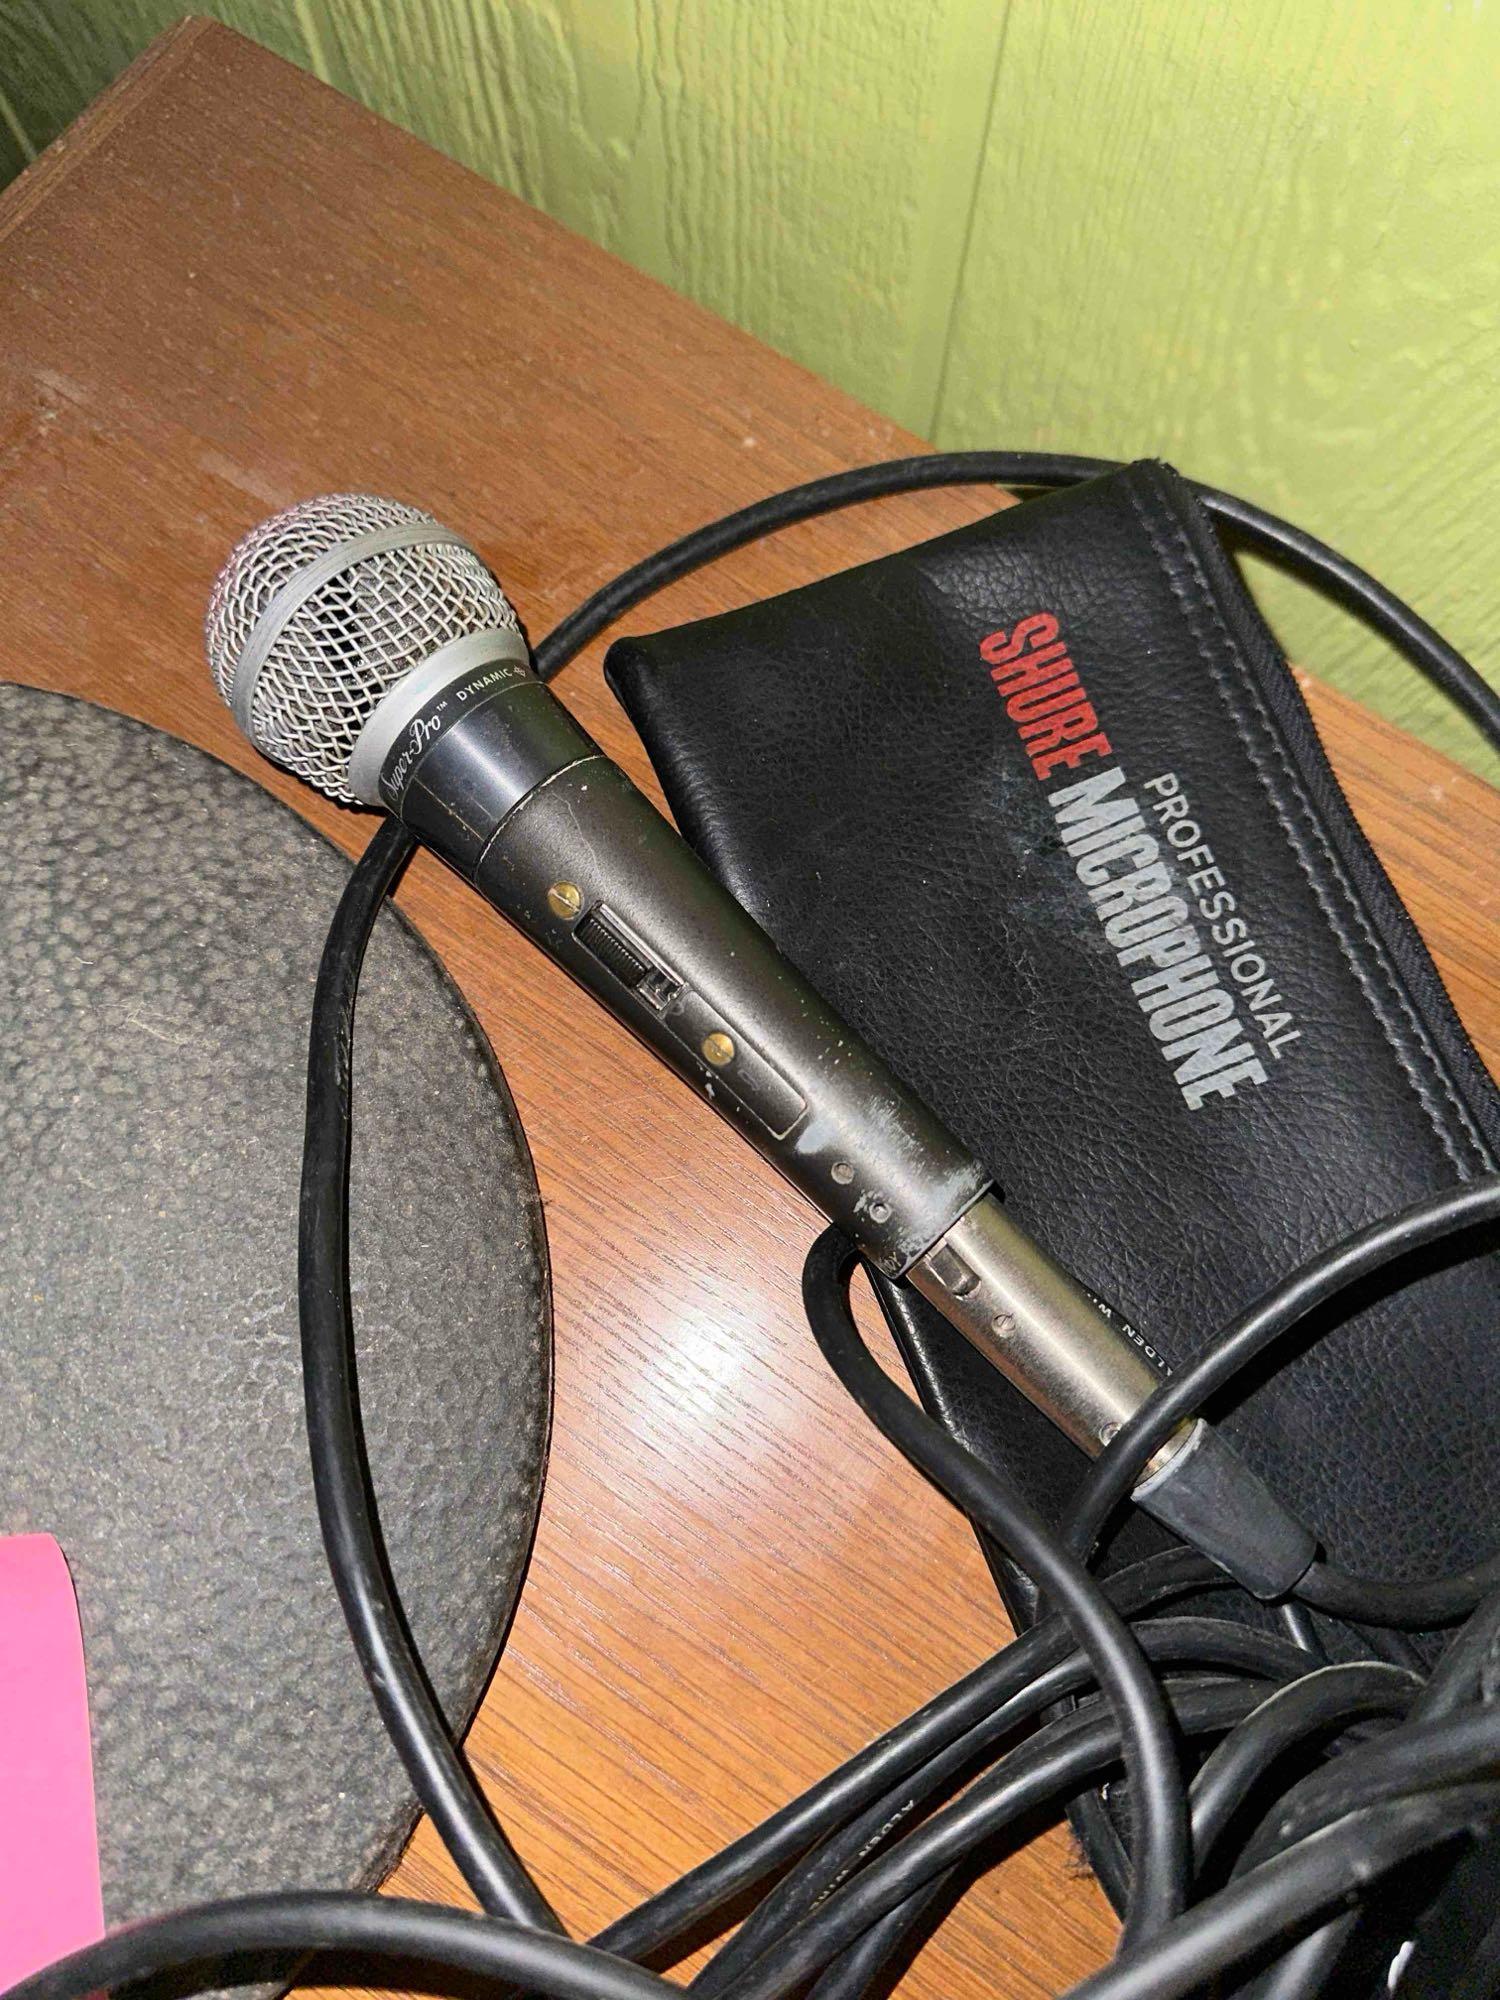 microphone with floor, stand cords, other electronics